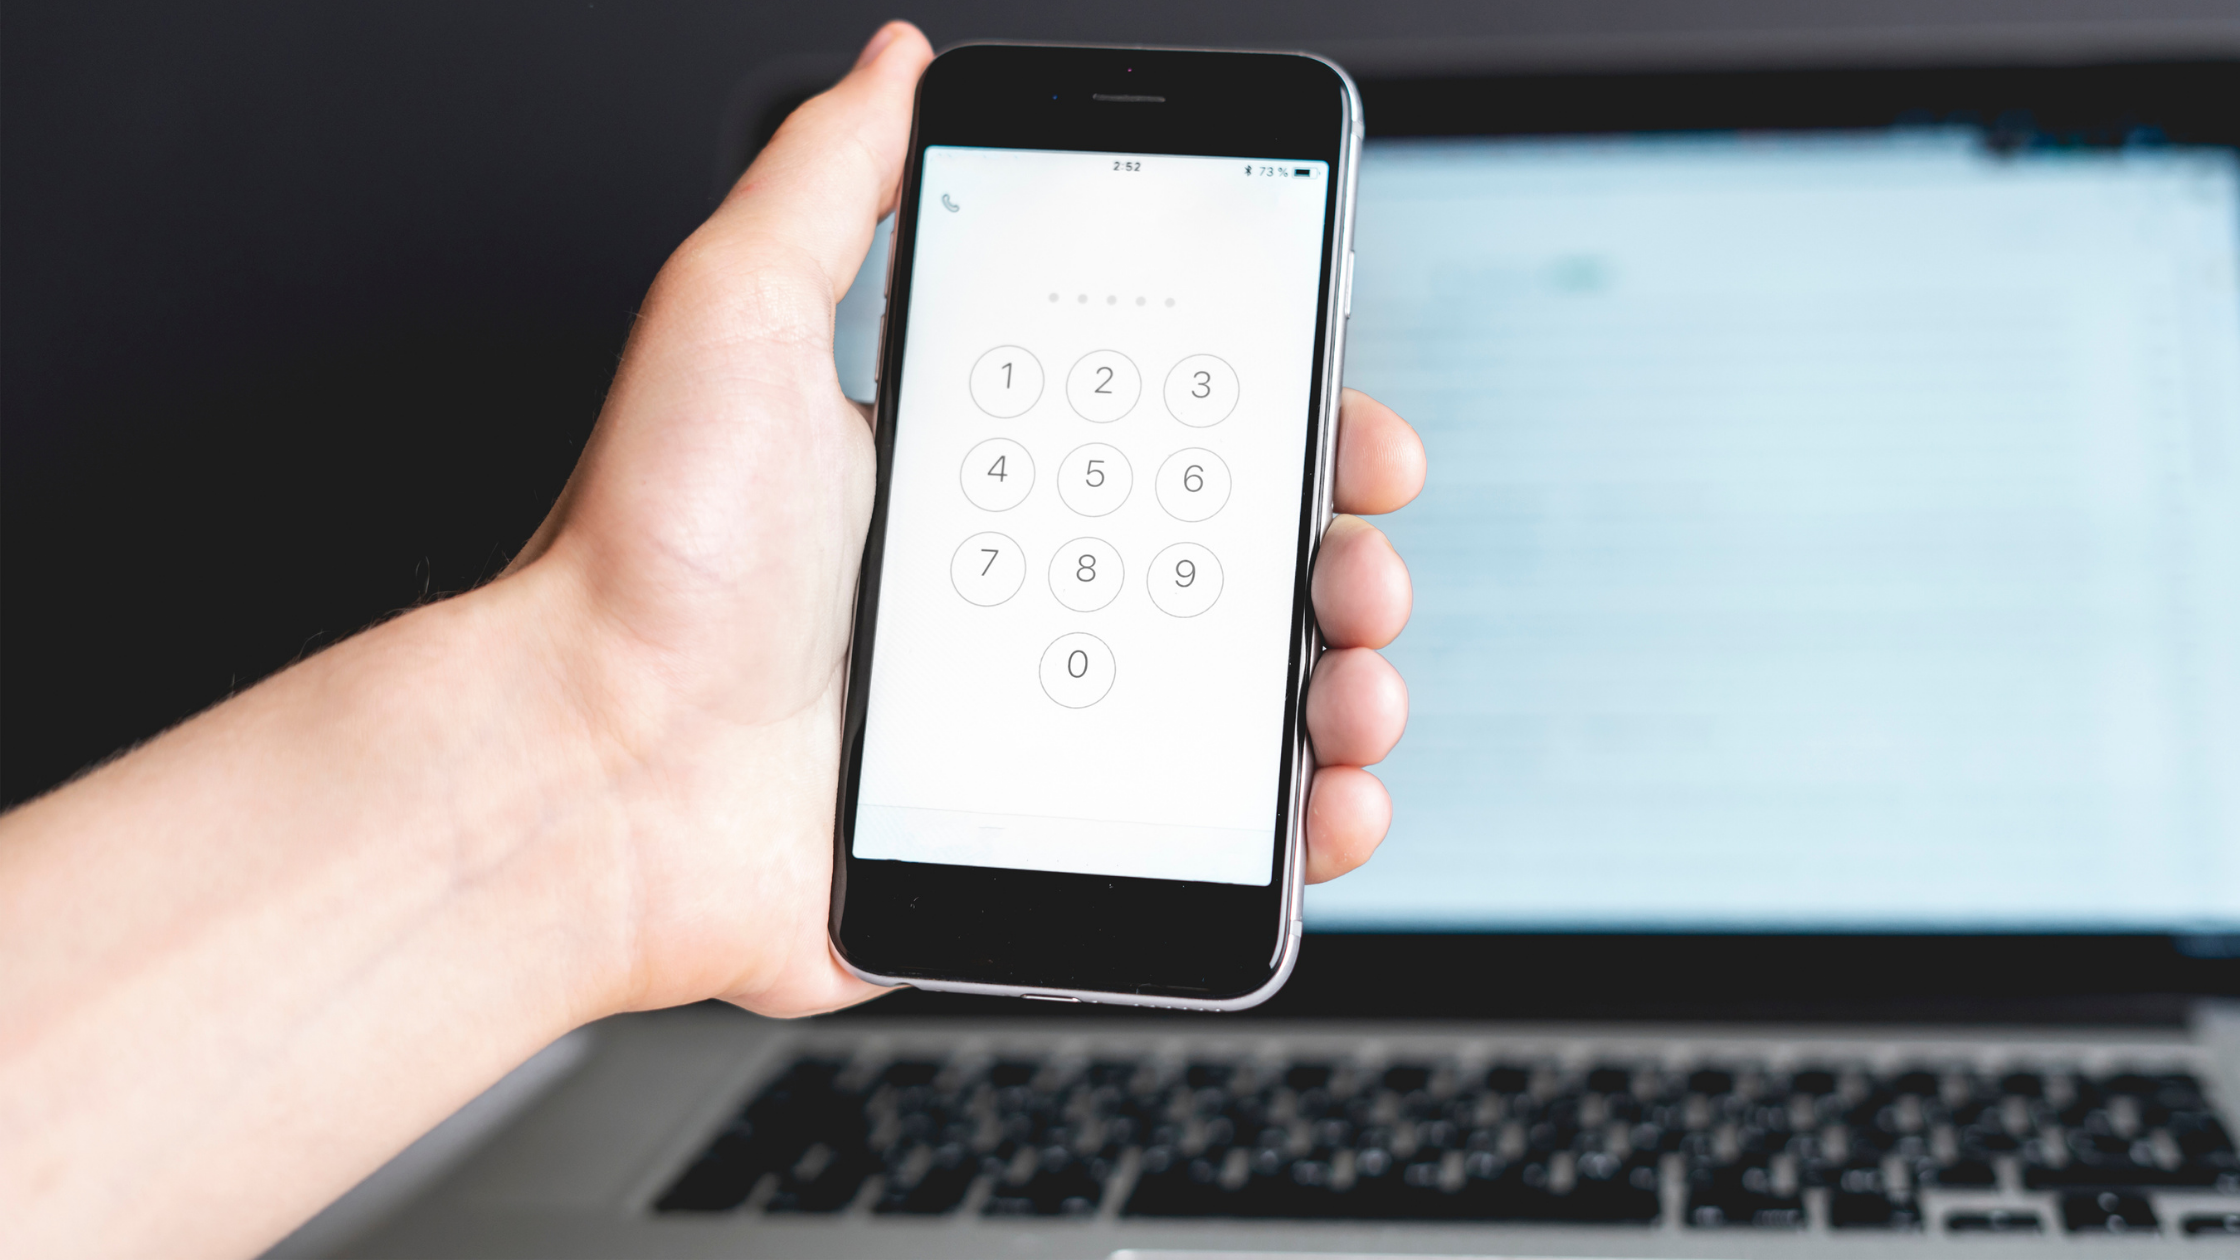 implement multi-factor authentication is best for businesses online accounts for its users, vendors to secure network and data in preventing a data breach